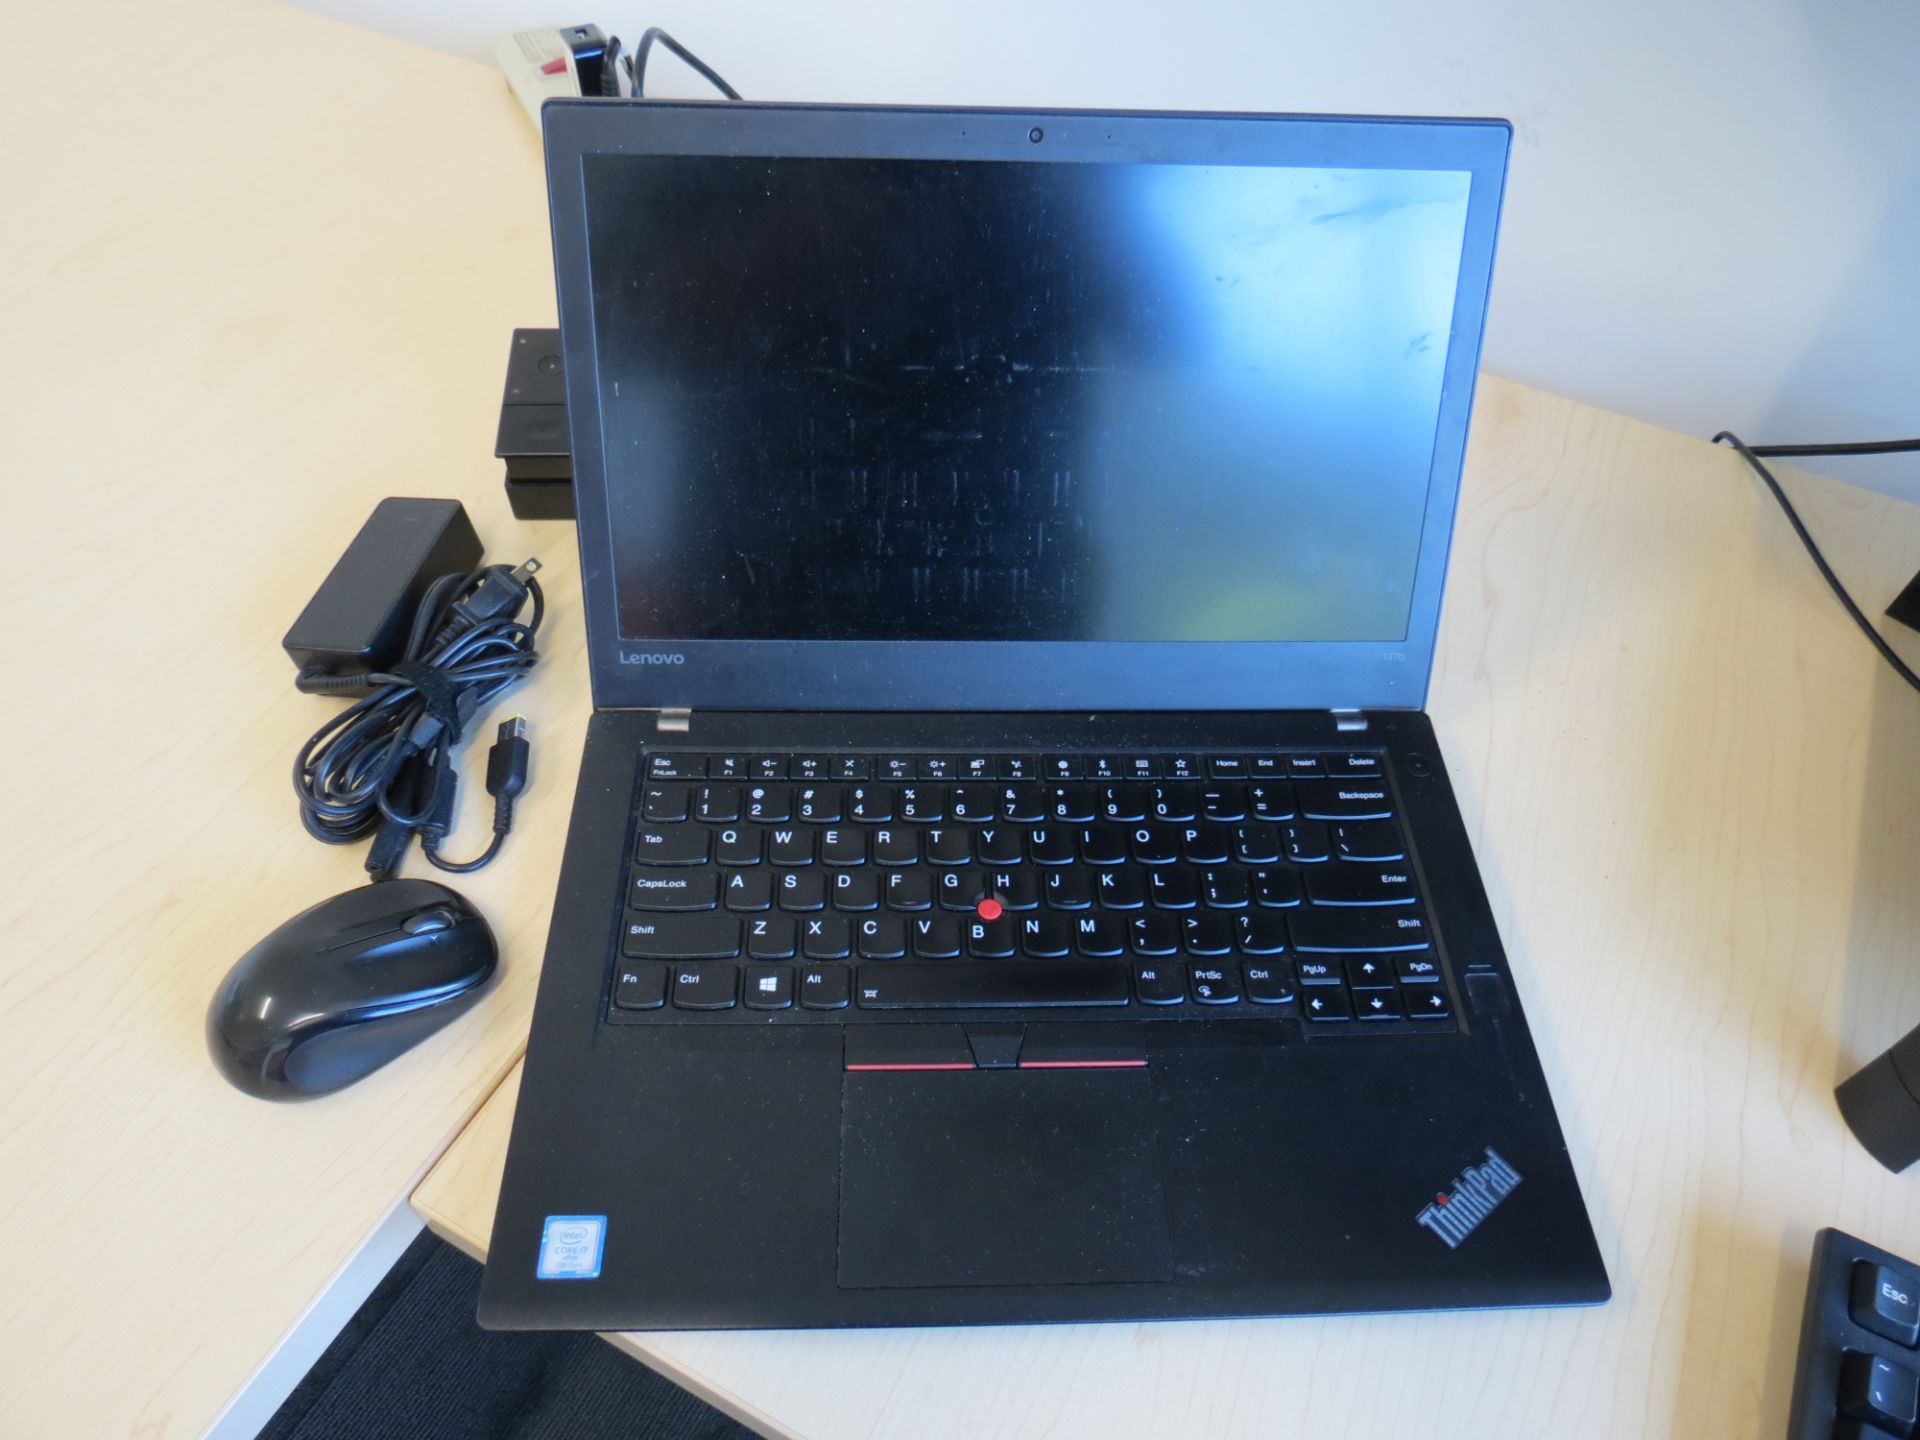 LENOVO T470 I7 7TH GEN LAPTOP, DOCKING STATION, MONITOR, KEYBOARD, MOUSE (SUBJECT TO CONFIRMATION) - Image 2 of 3